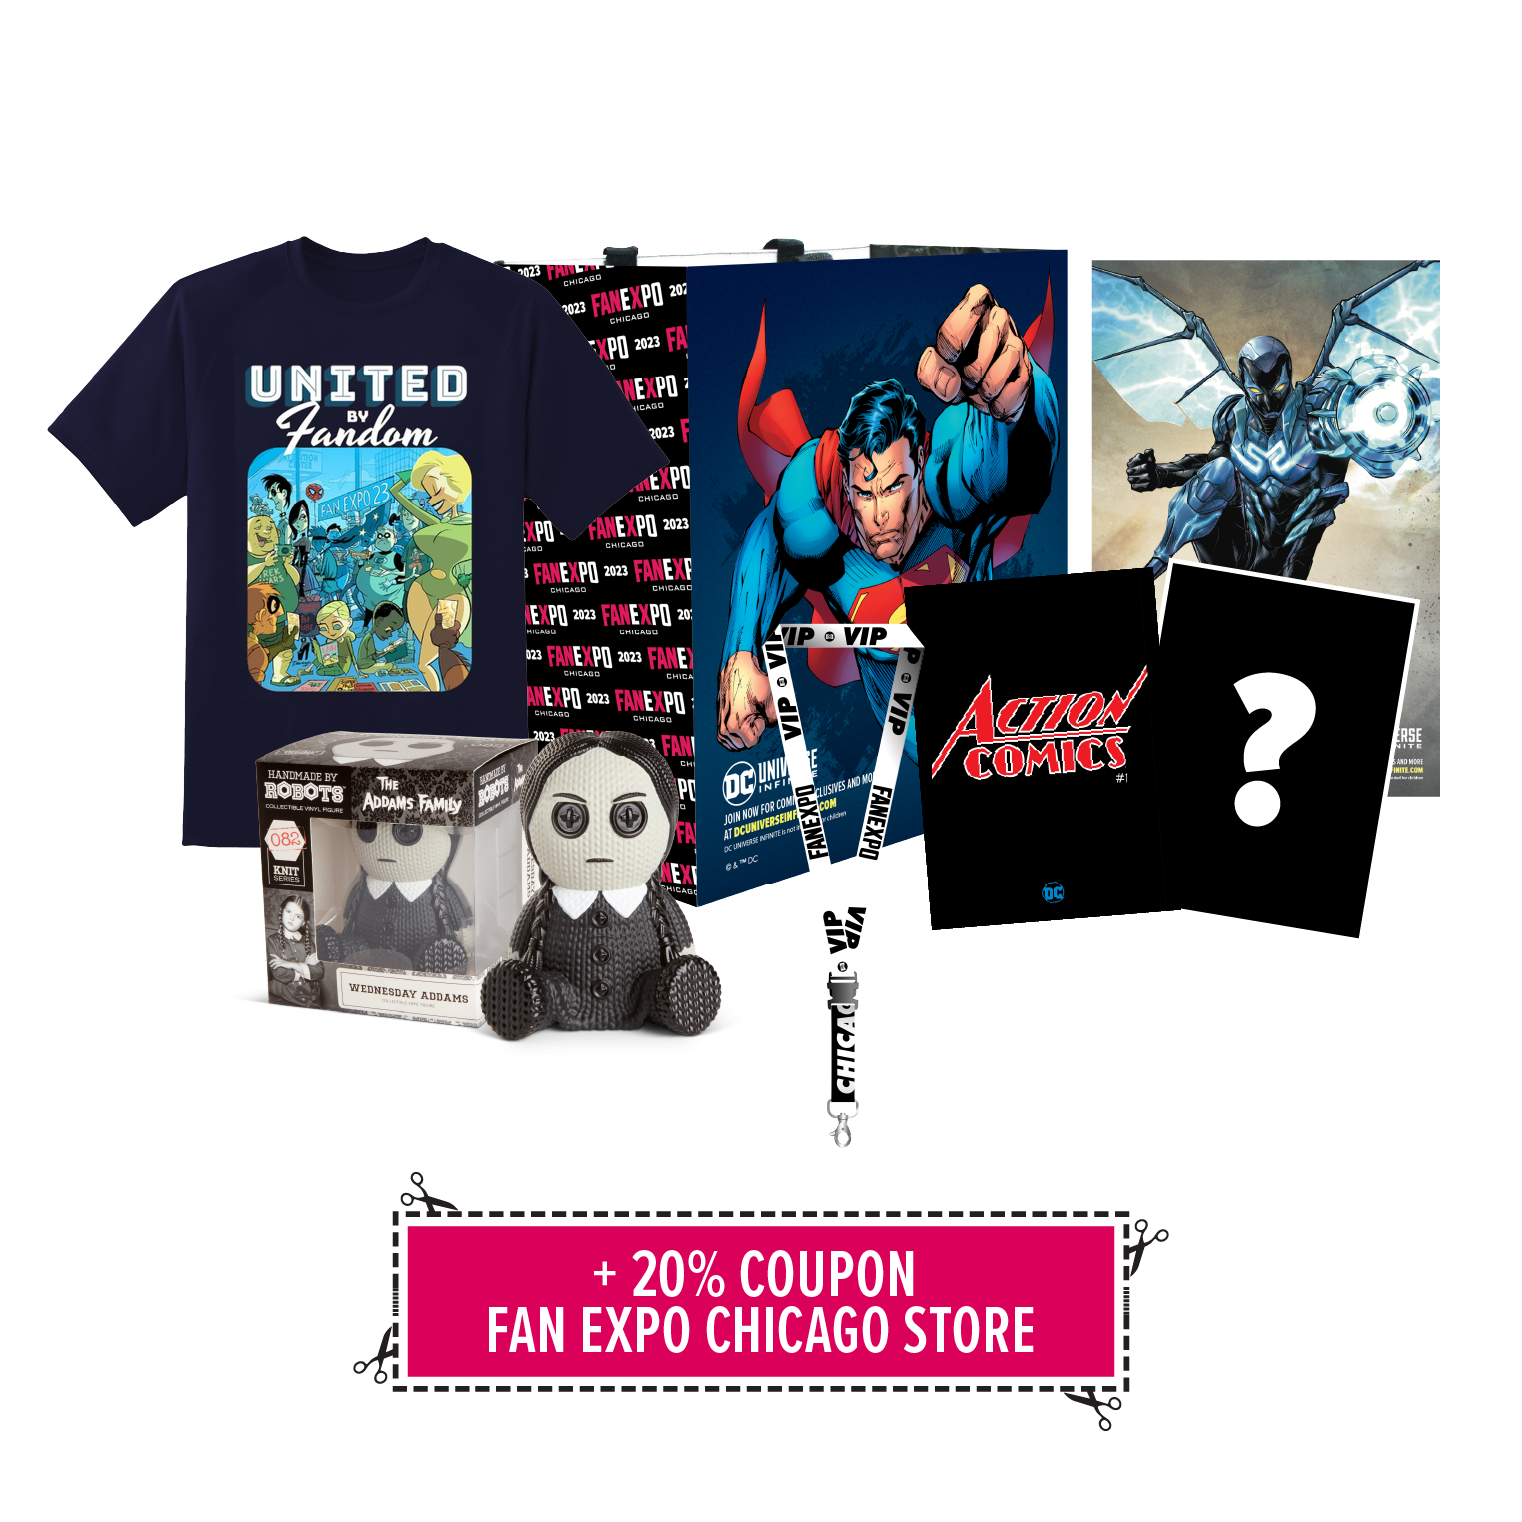 Buy Tickets FAN EXPO Chicago